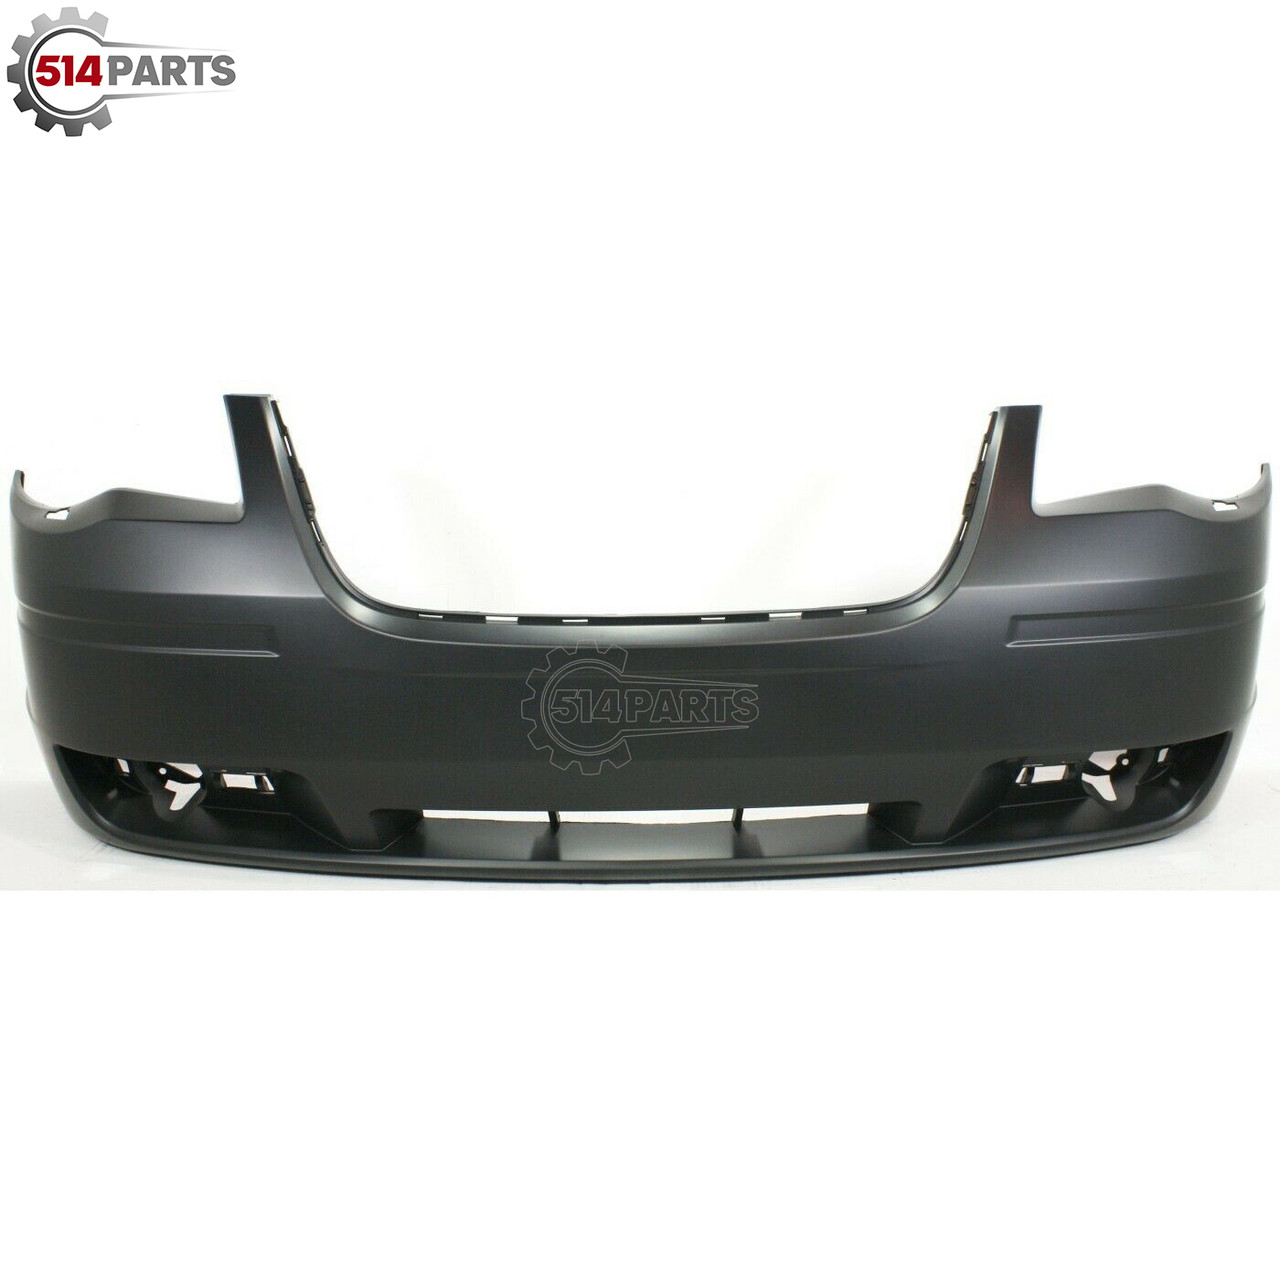 2008 - 2010 CHRYSLER TOWN and COUNTRY FRONT BUMPER COVER with HEADLIGHT WASHER without MOULDING HOLES - PARE-CHOCS AVANT avec LAVE-PHARE sans TROUS DE MOULAGE